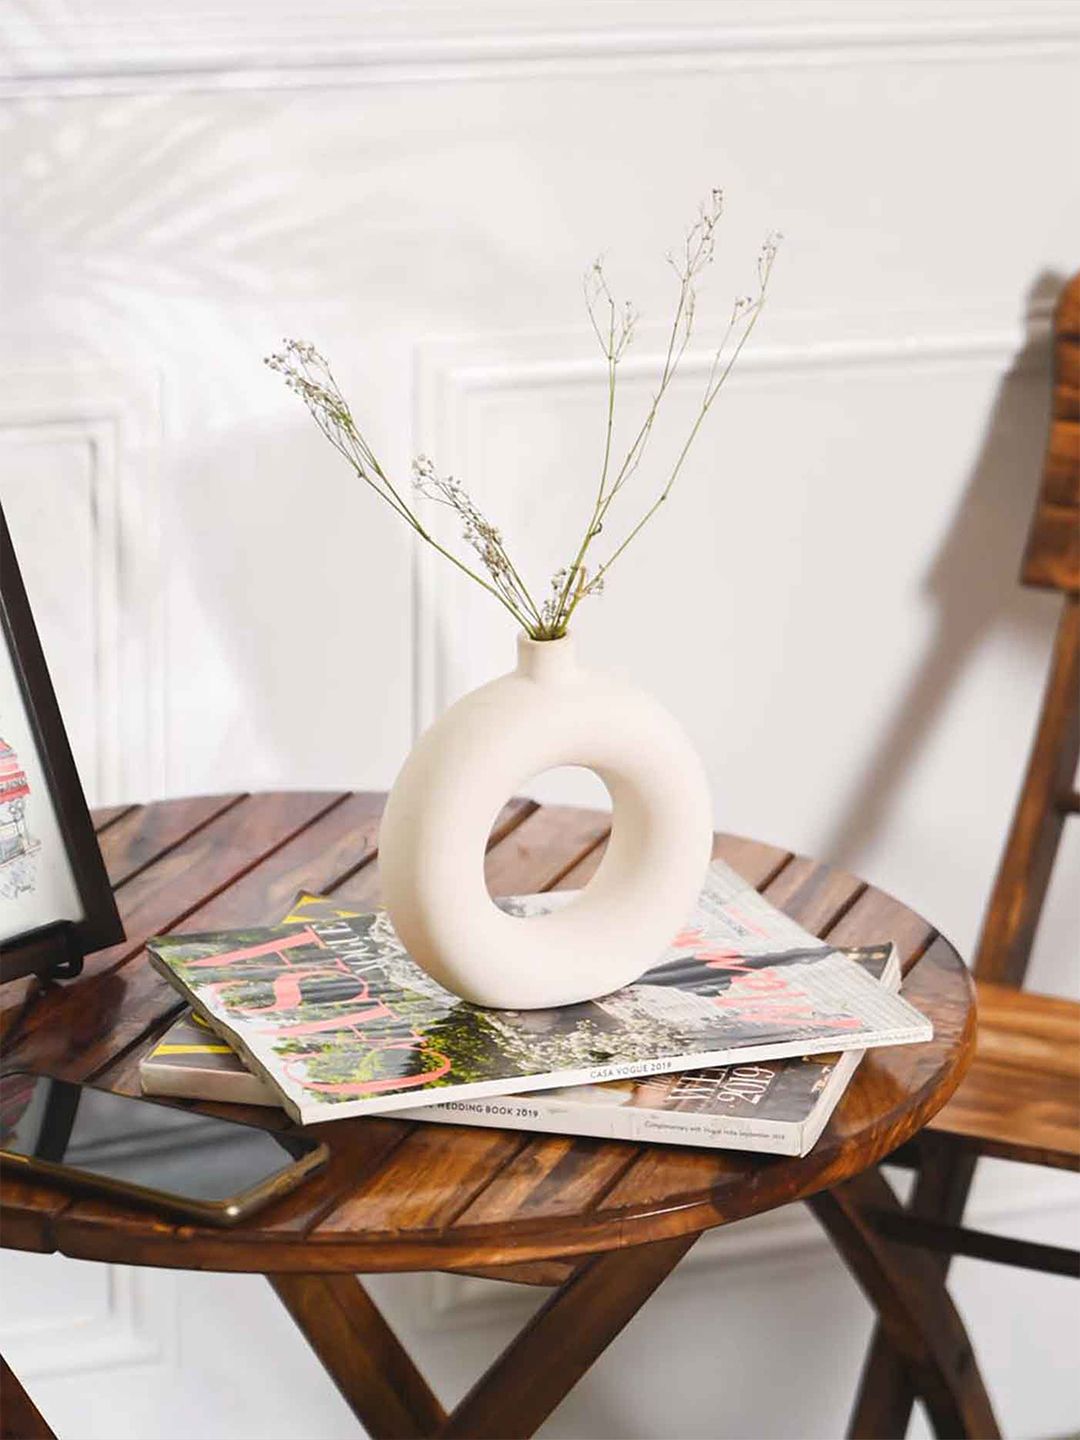 PUREZENTO White Solid Donut Shaped Flower Vases Price in India